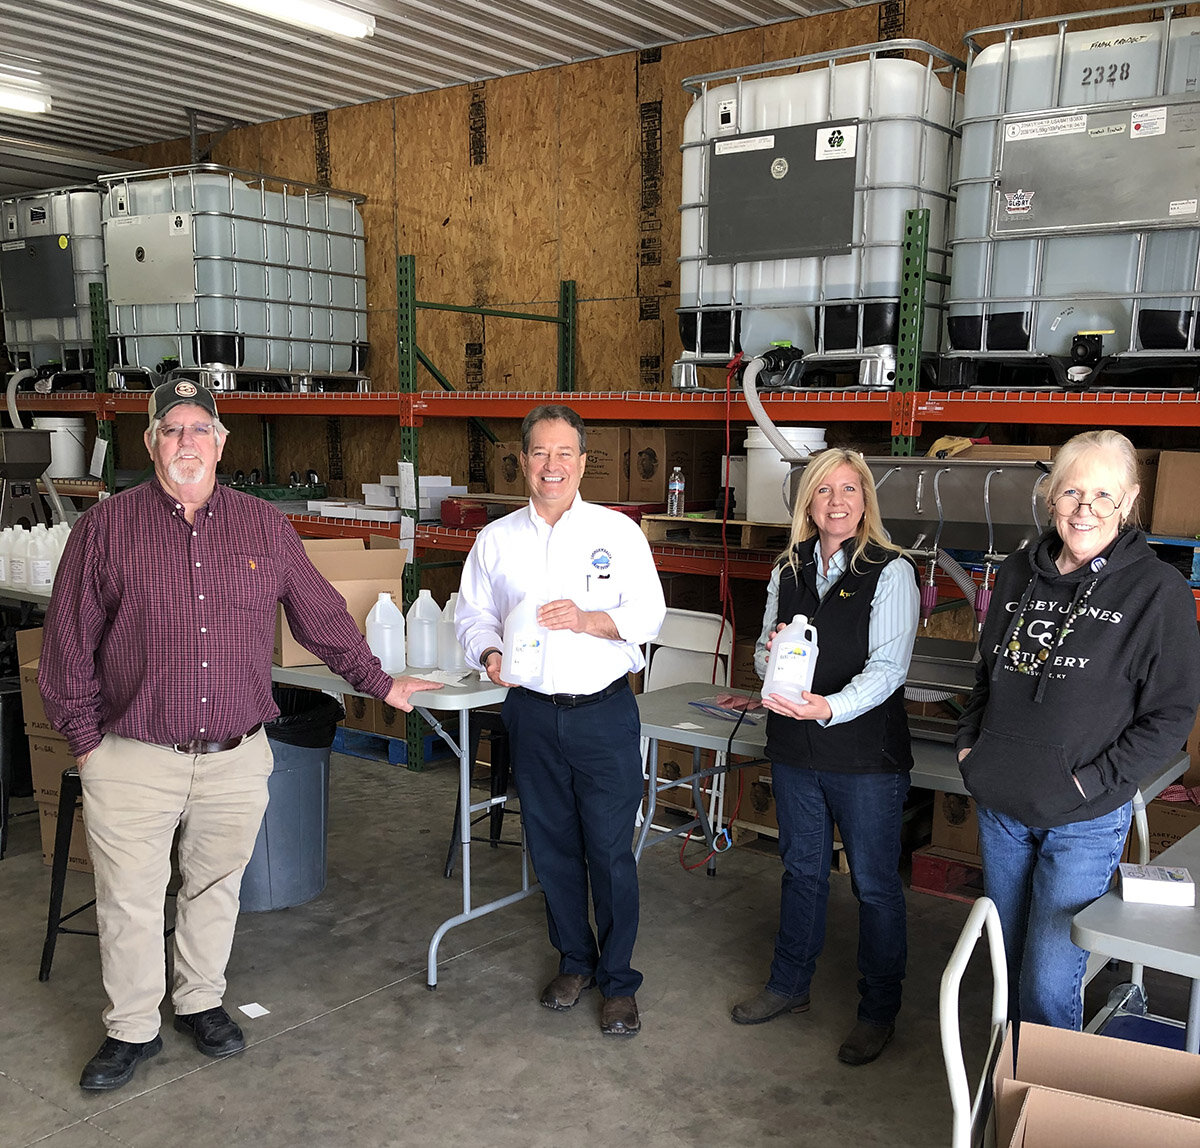 AJ and Peg Hayes (far left and far right) of Casey Jones Distillery in Hopkinsville stand with Commonwealth Agri-Energy General Manager Mick Henderson and KyCorn Executive Director Laura Knoth after they packaged and labeled 200 bottles of ethanol s…